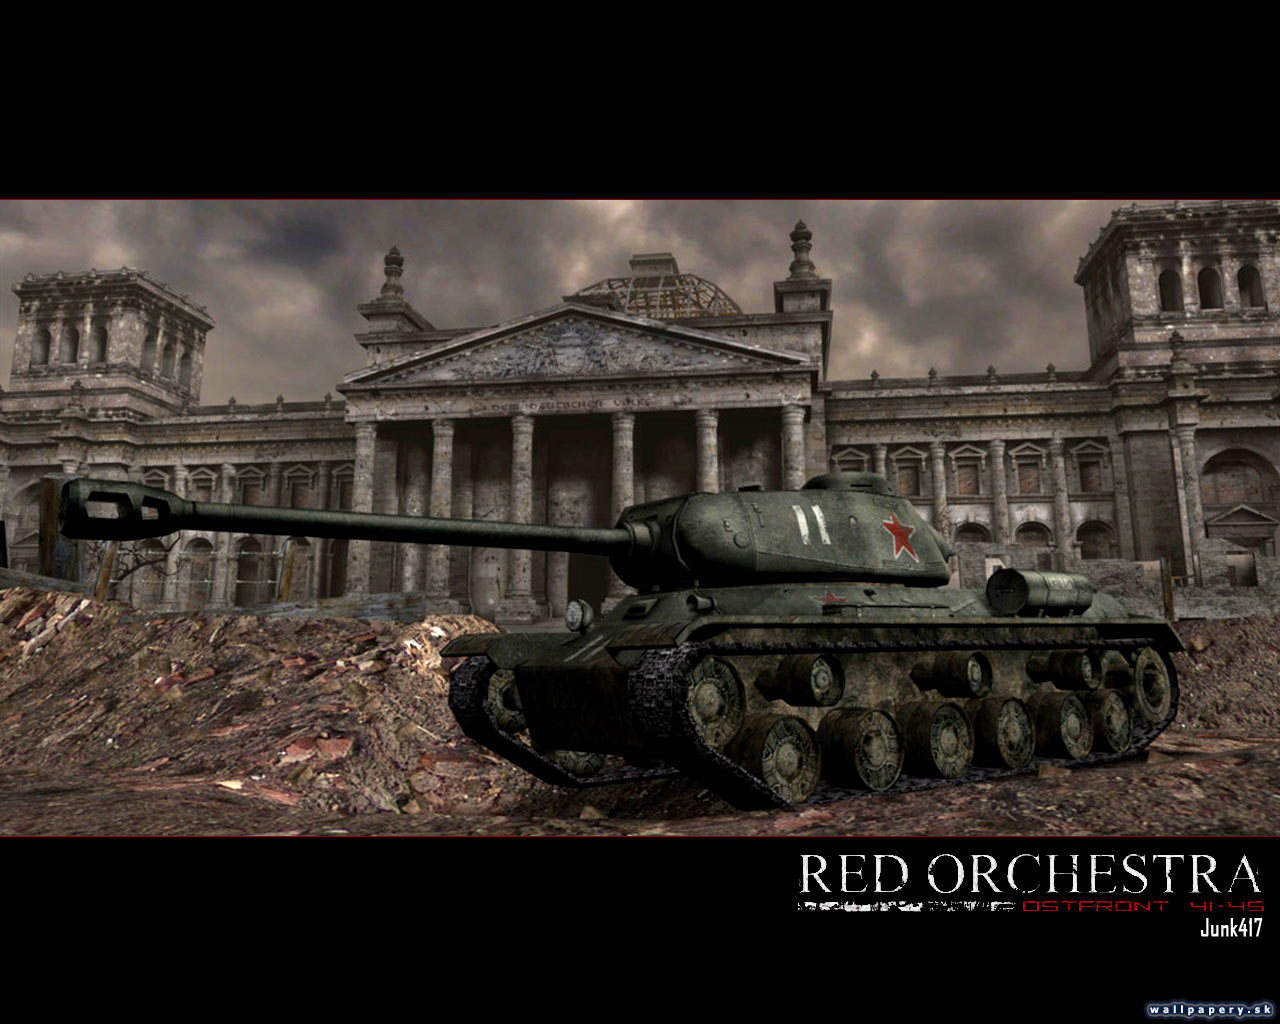 Red Orchestra: Ostfront 41-45 - wallpaper 11